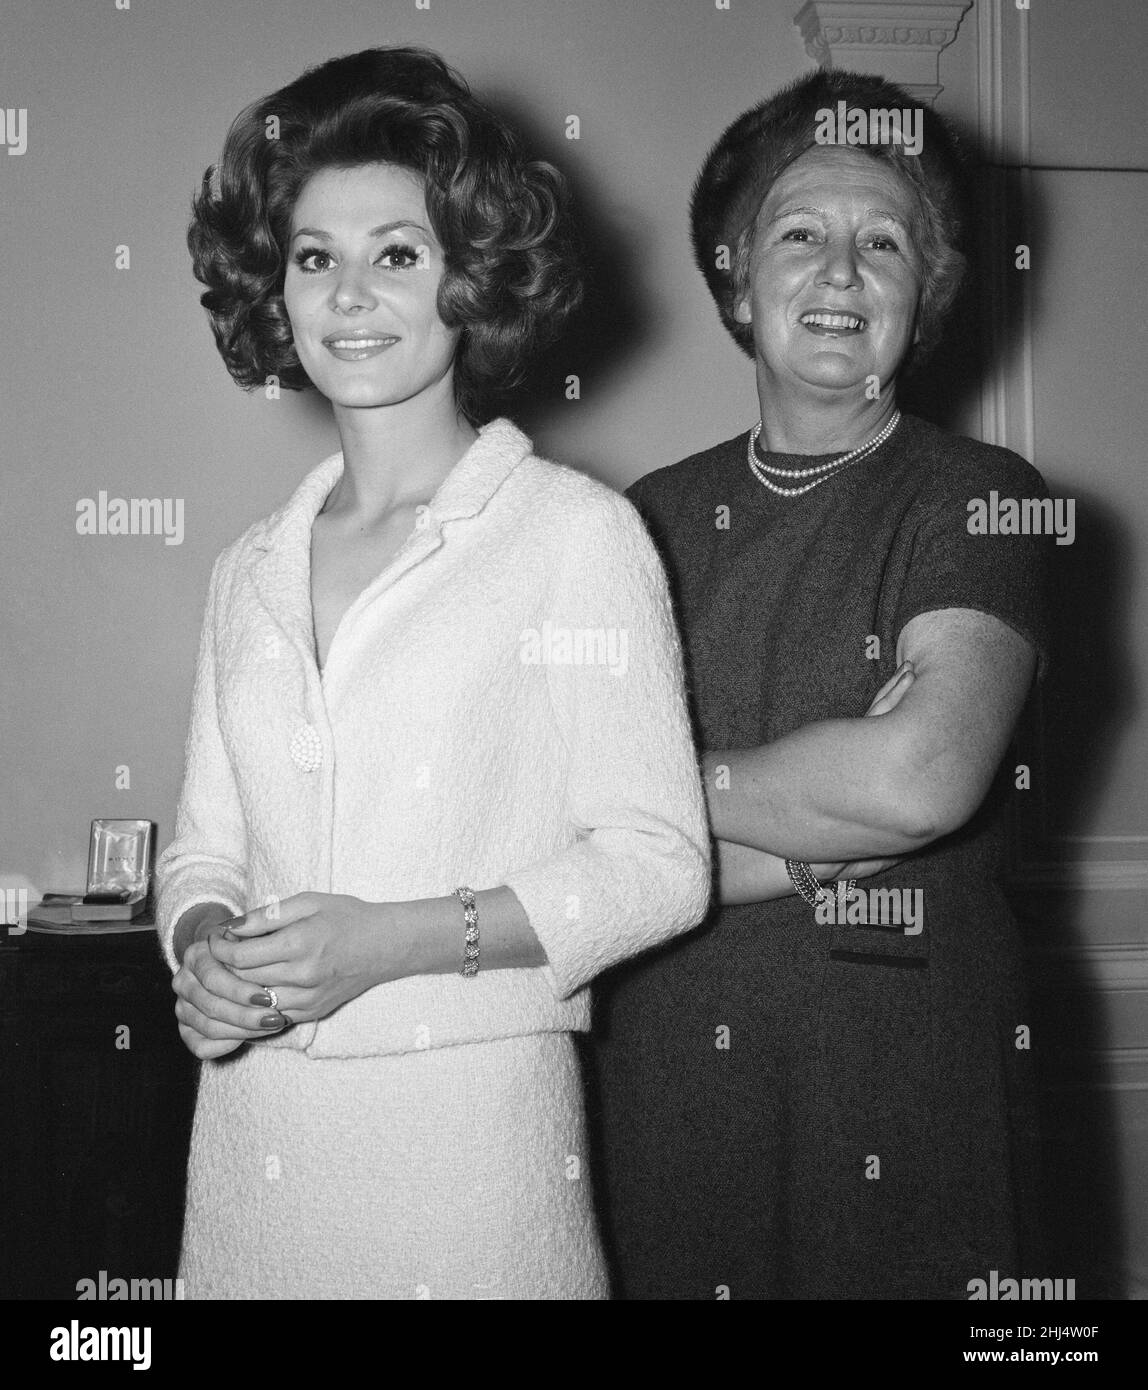 Irina Demick, french actress, in the UK for premiere of new film, The Longest Day, in which she stars as Janine Boitard, French Resistance, Caen, pictured at the Savoy Hotel, London, Tuesday 10th October 1961. The character Janine Boitard is based on real life resistance fighter Louise Boitard PICTURED, known as Jeanine Boitard in the resistance. Stock Photo